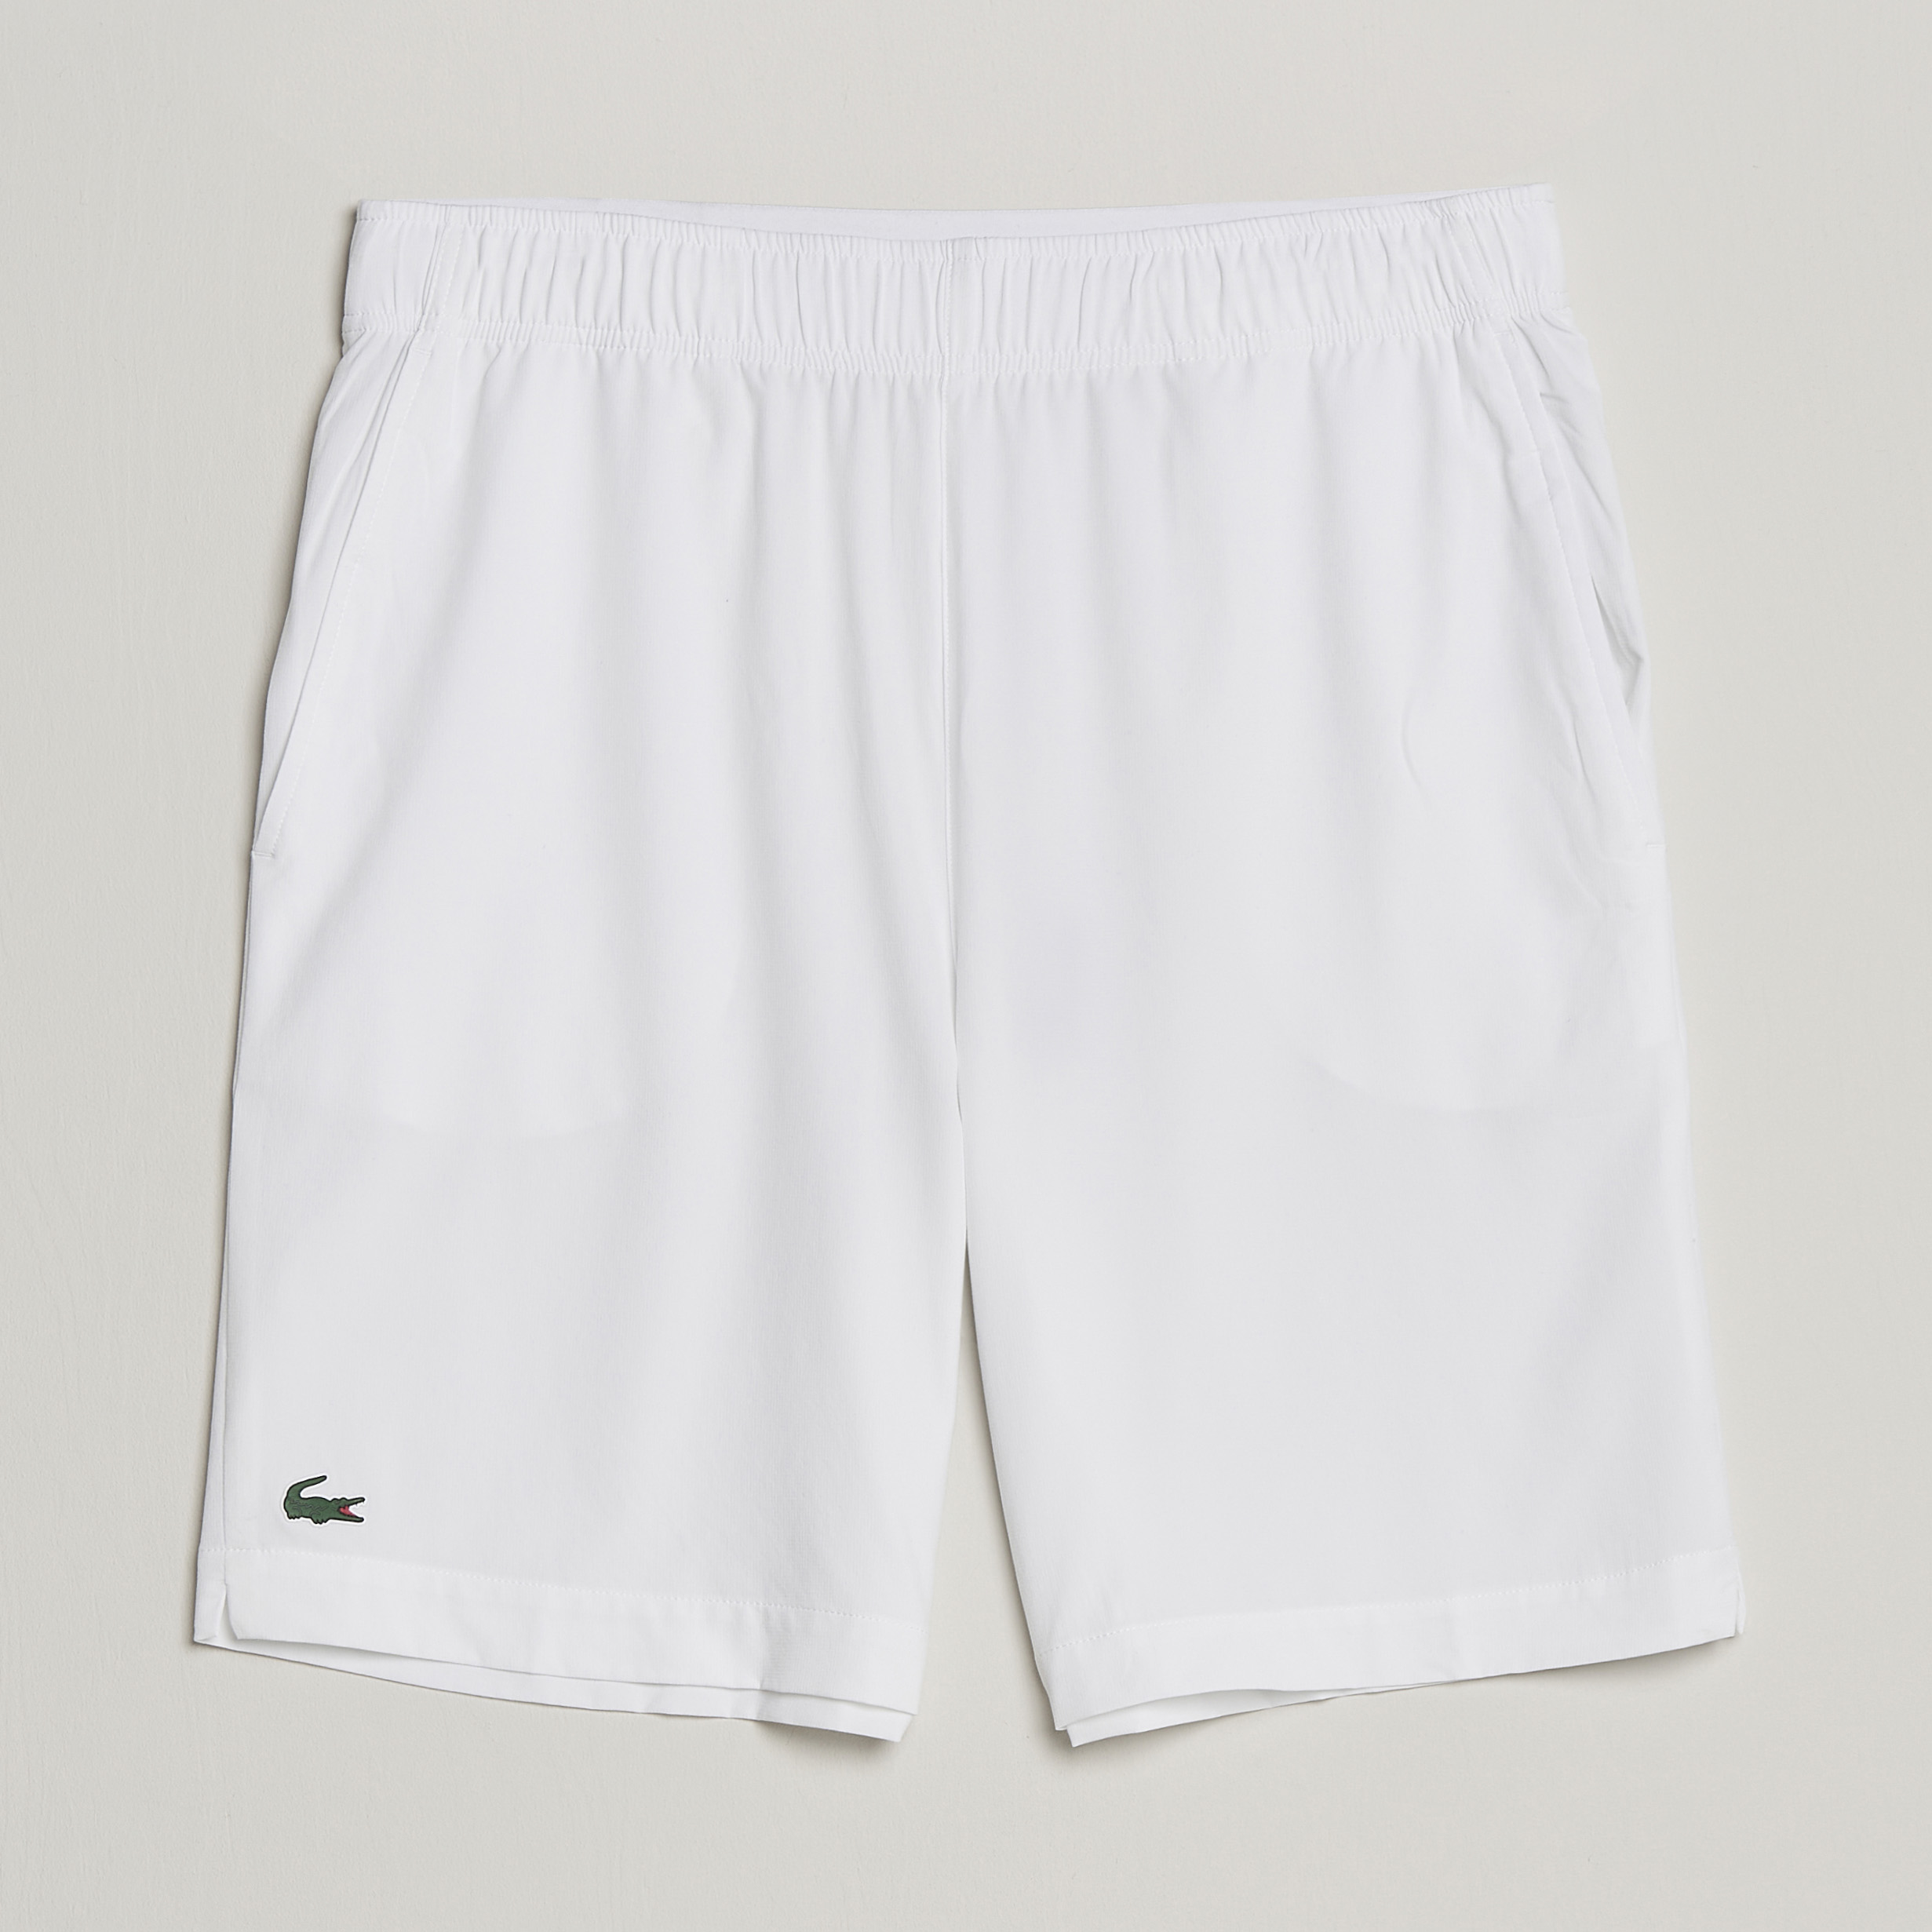 Lacoste Sport Performance Shorts White at CareOfCarl.com